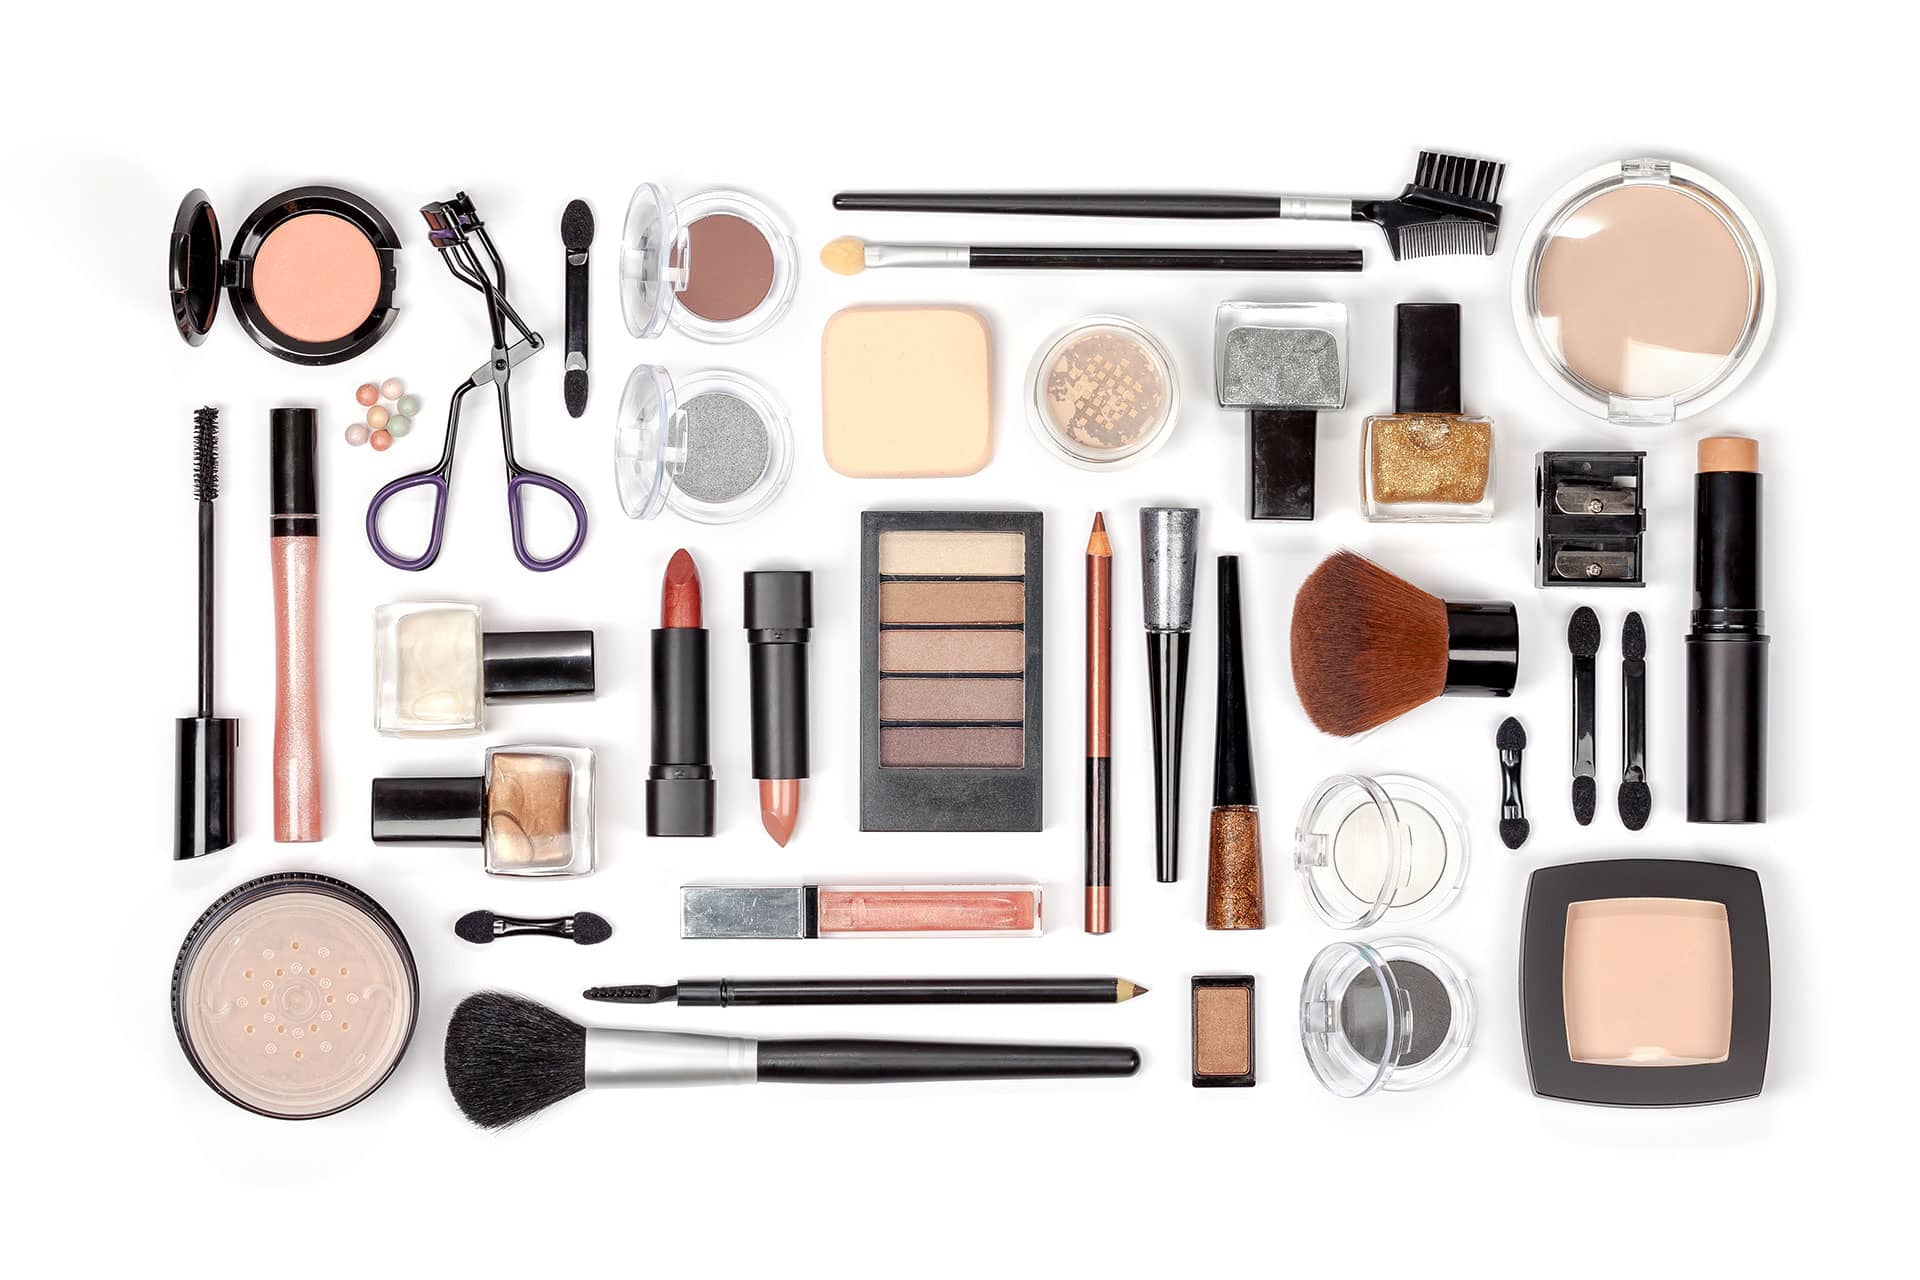 spread of different healthy makeup brands and tools